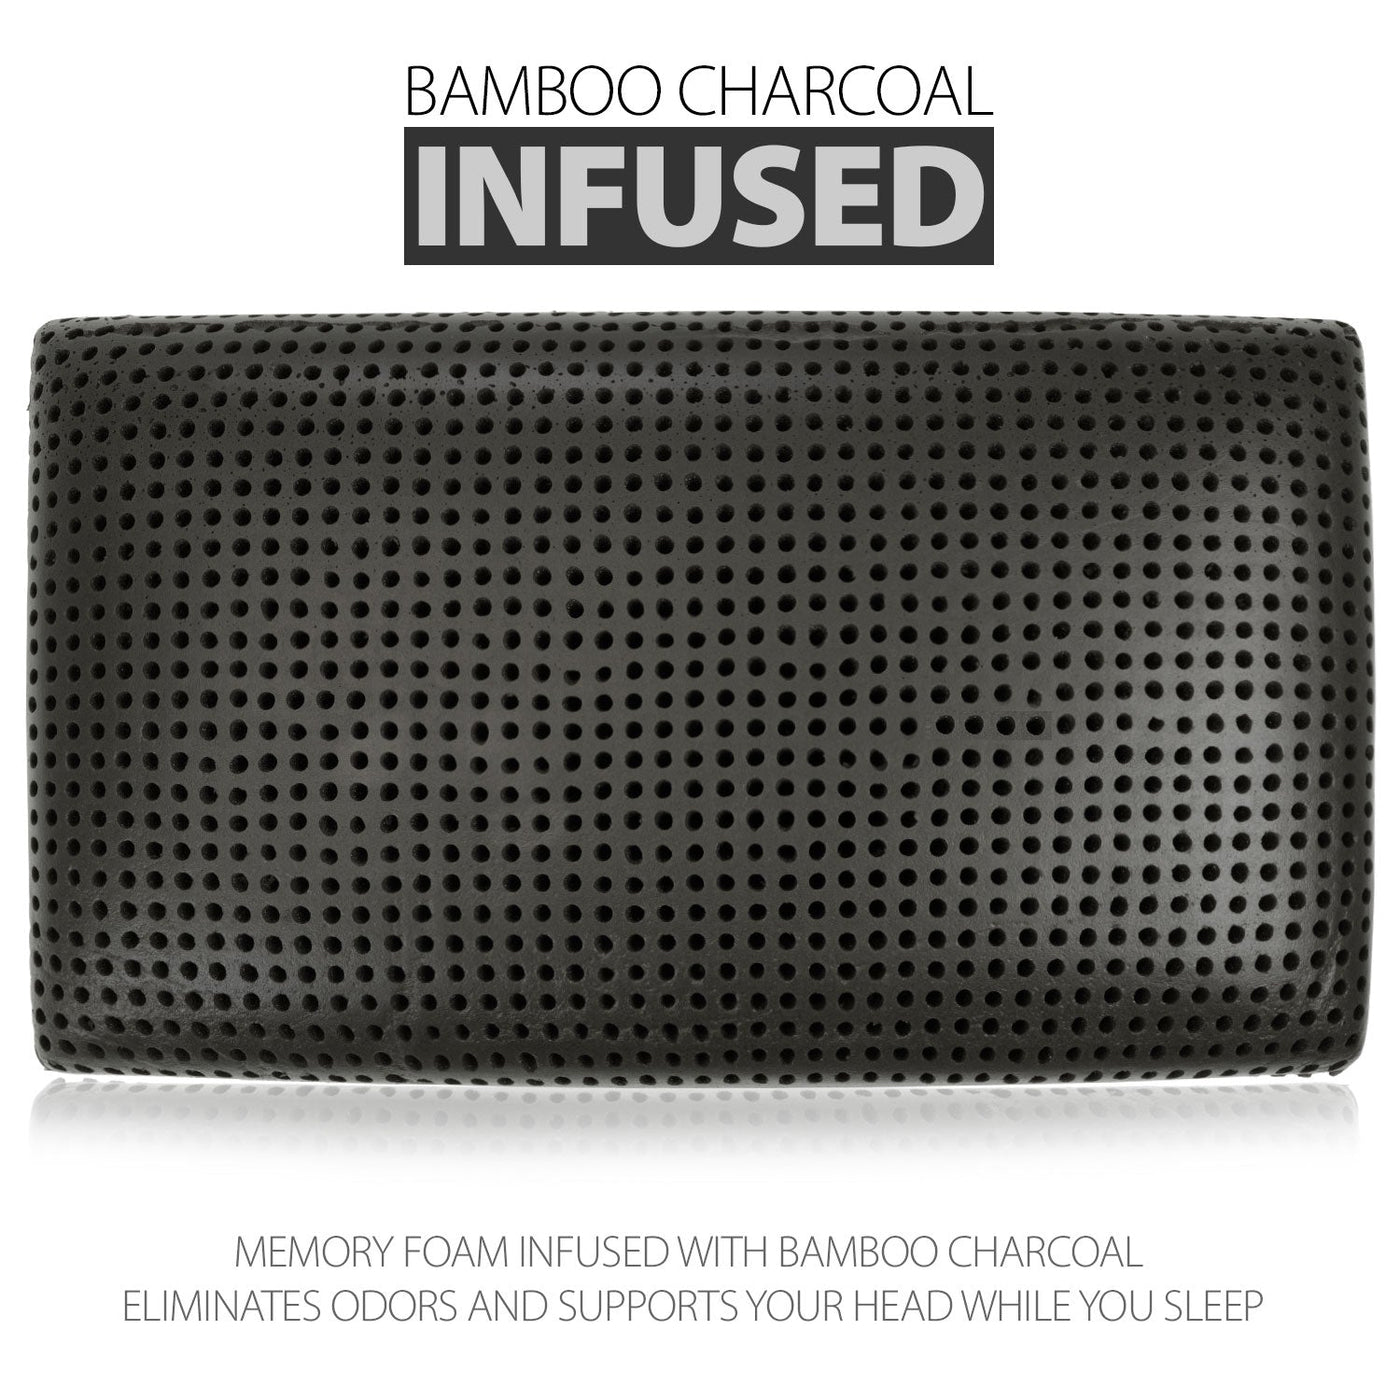 Ventilated Charcoal Bamboo Infused Memory Foam Pillow - Washable Cover - mysleepscience.com